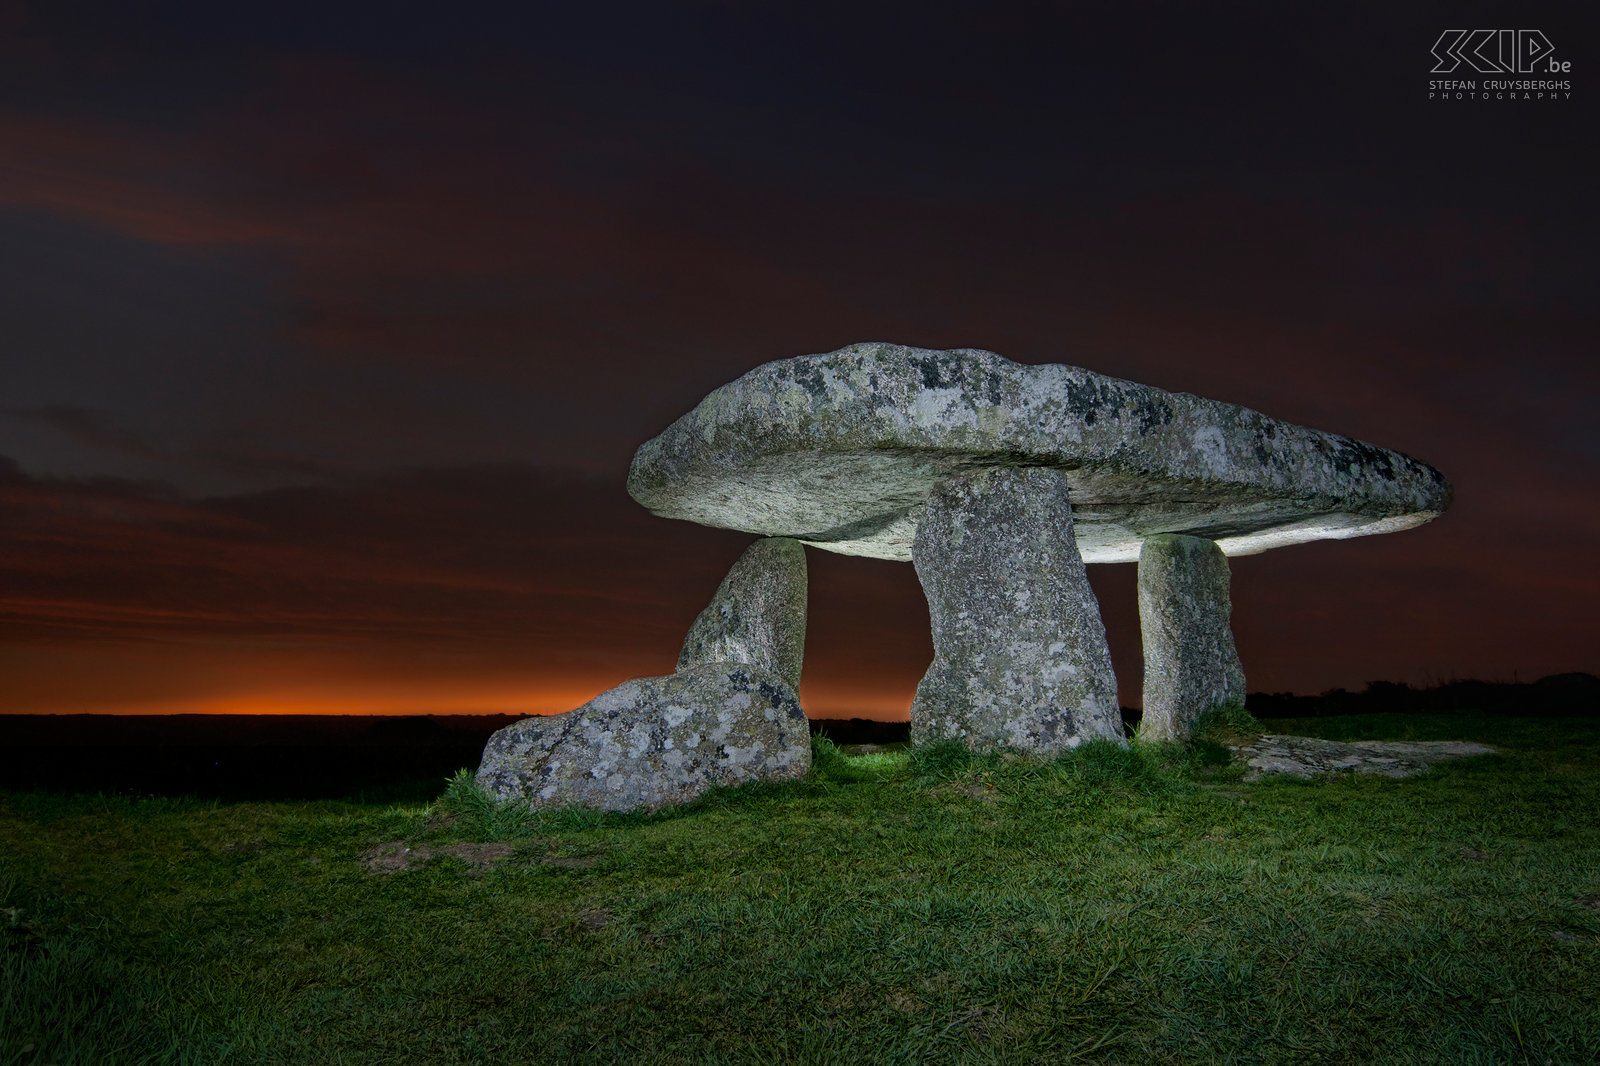 Lanyon Quoit The best-known dolmen in Cornwall is Lanyon Quoit. This photo is my first experiment with long exposures and painting with my flash and a torch at night. It took some time but I'm quite happy with the final result. Stefan Cruysberghs